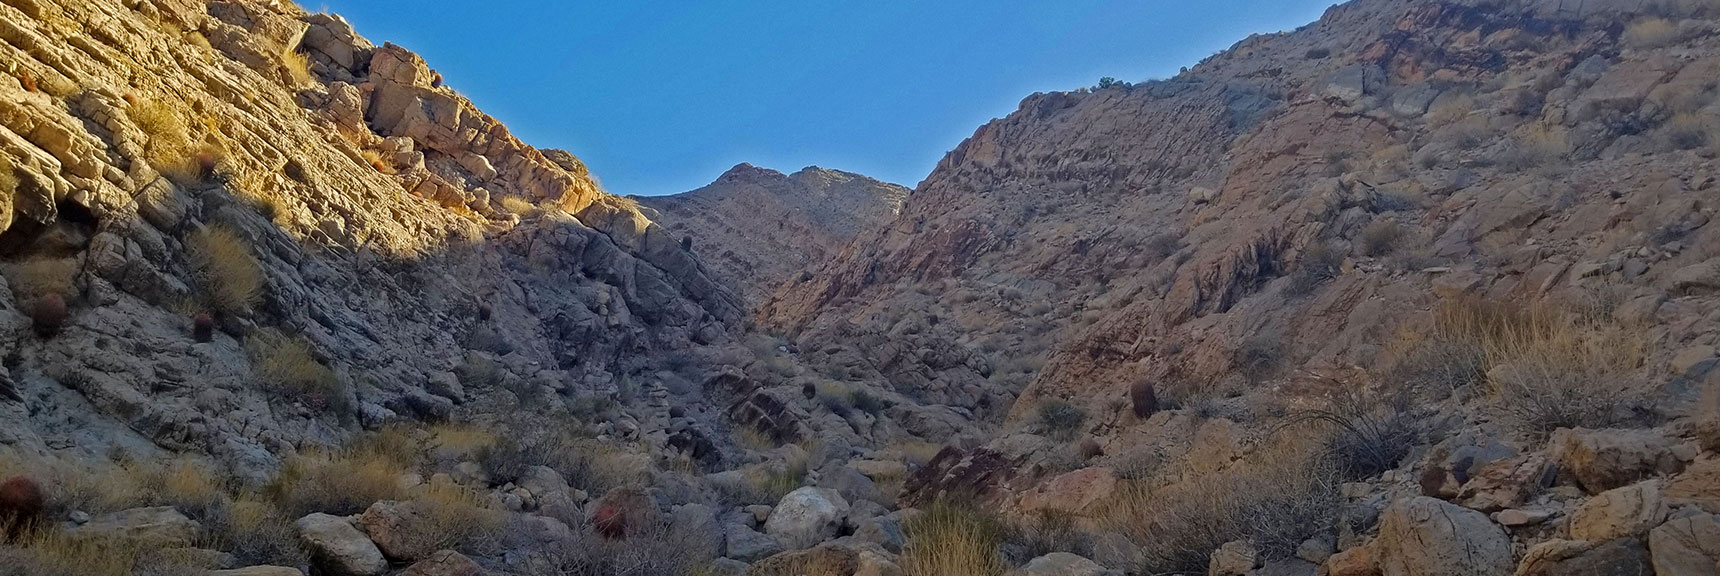 "Cairn Wash": Most Commonly Used Summit Route on South Side of Sunrise Mt. | Sunrise Mountain, Las Vegas, Nevada